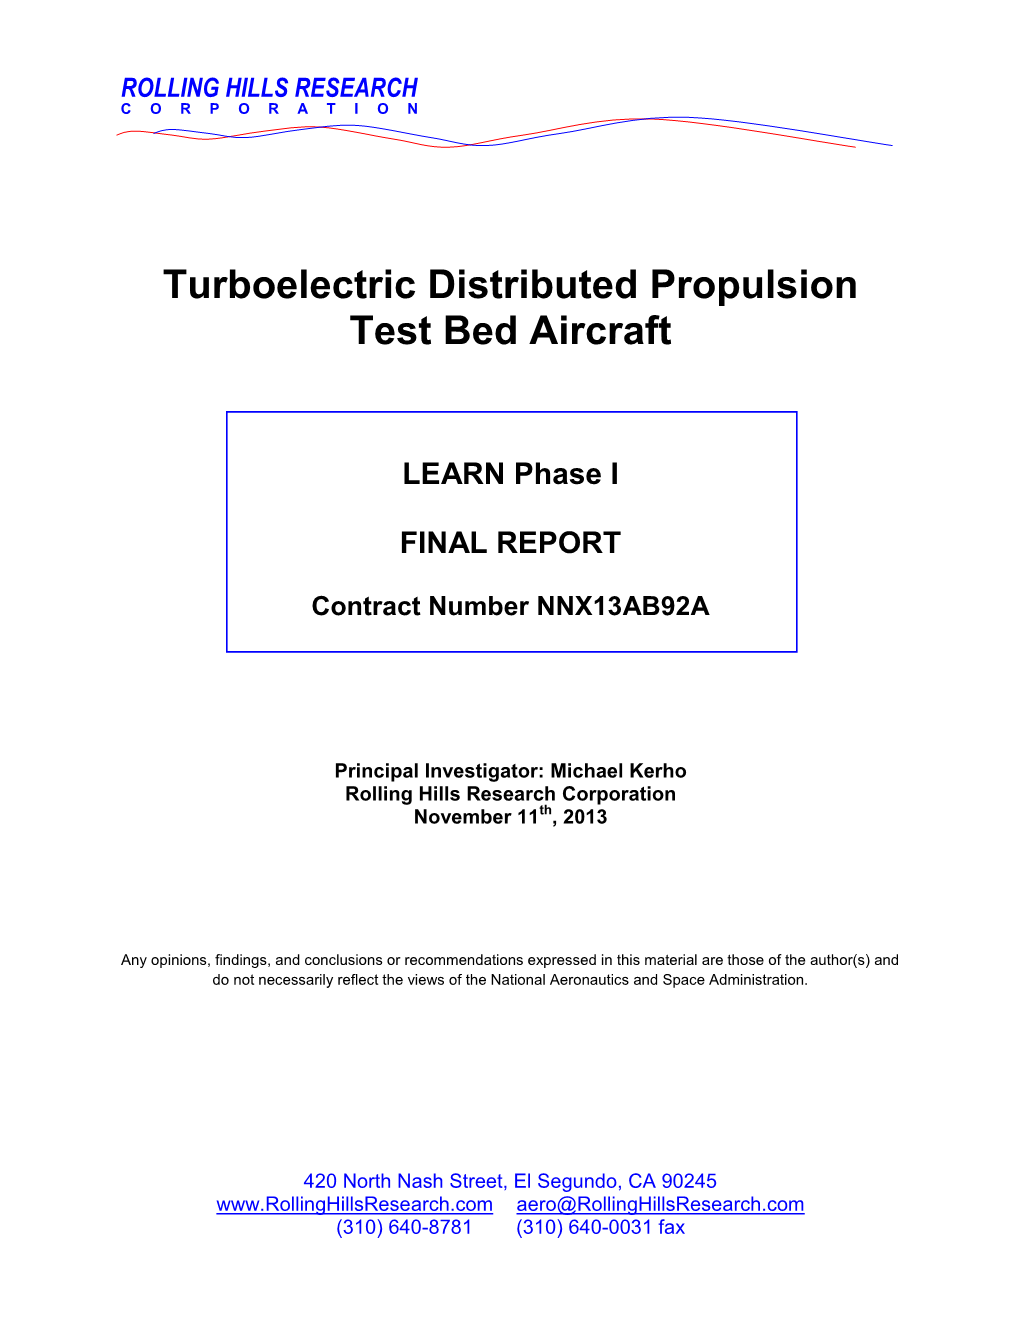 Turboelectric Distributed Propulsion Test Bed Aircraft